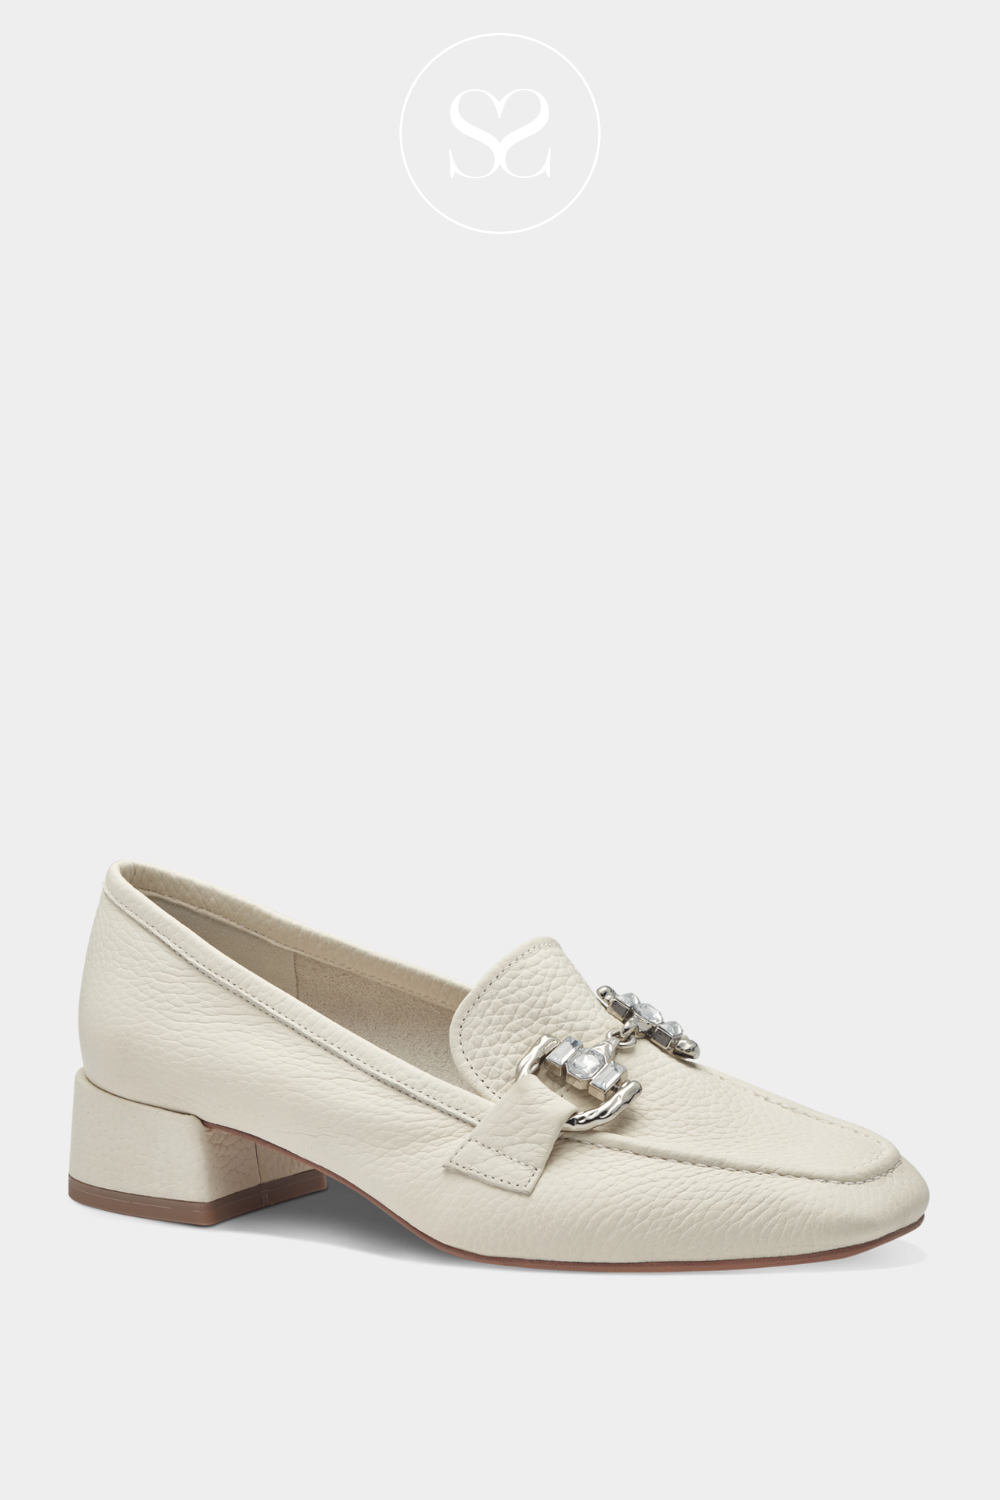 TAMARIS 1-24310-42 OFF WHITE IVORY CREAM LEATHER HEELED LOAFERS